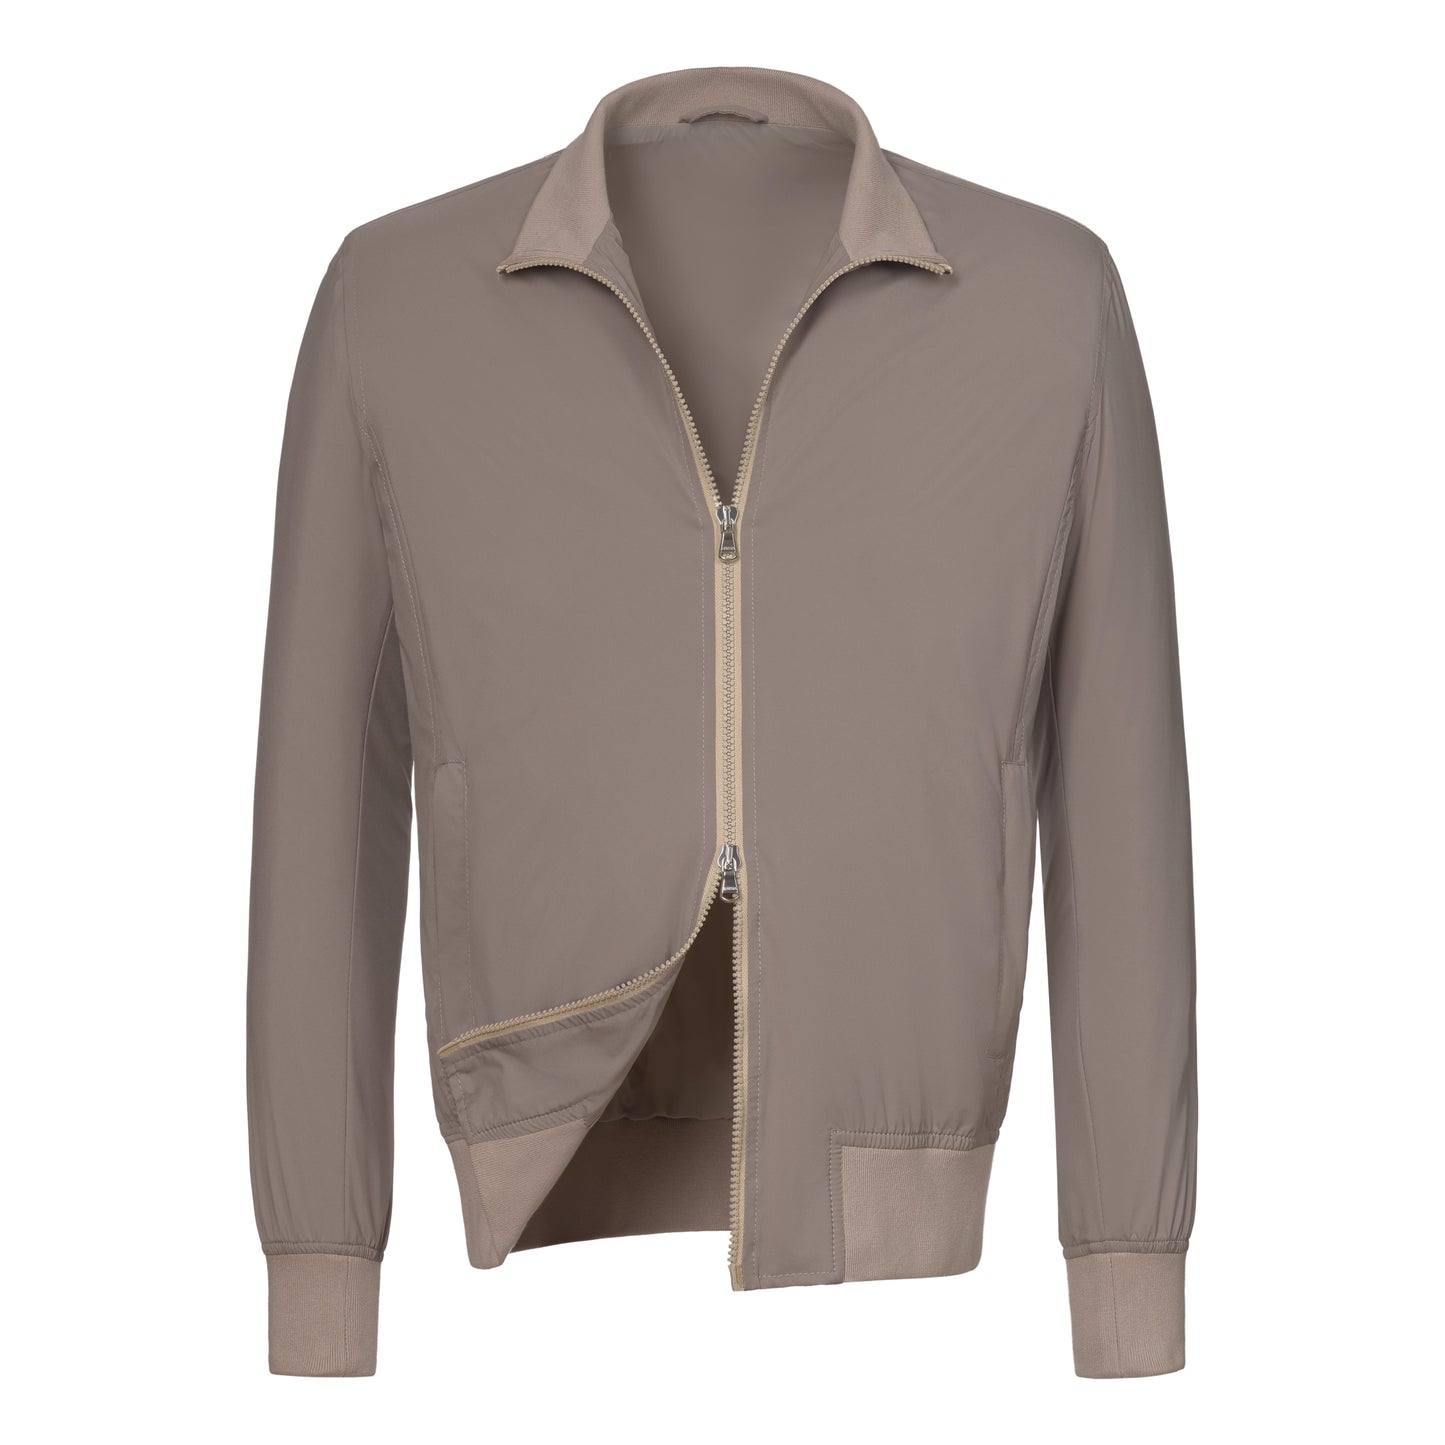 Stand-Up Collar Blouson in Greige